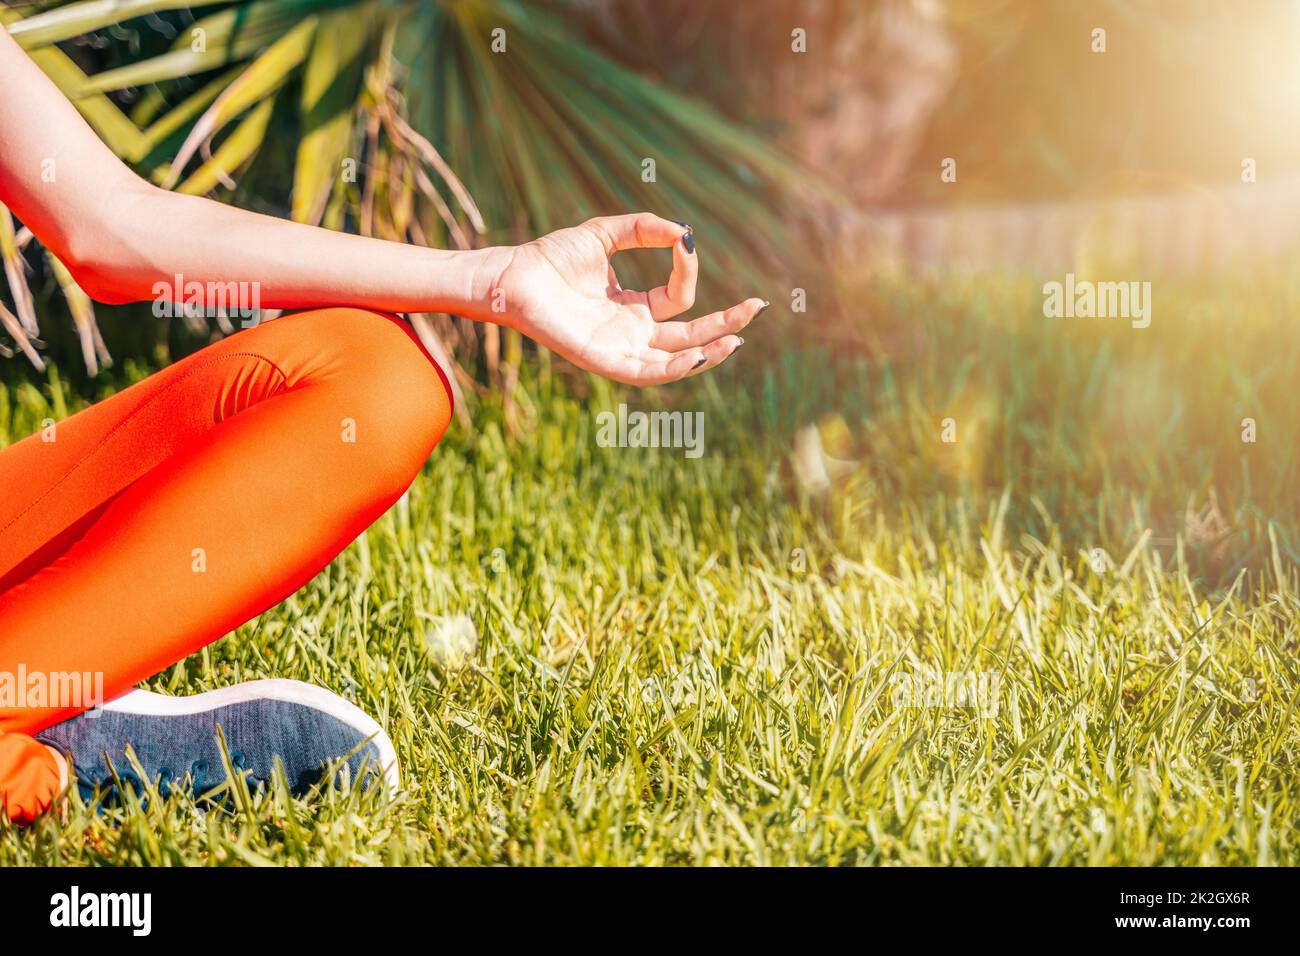 Woman relaxing in yoga position in a green garden Stock Photo